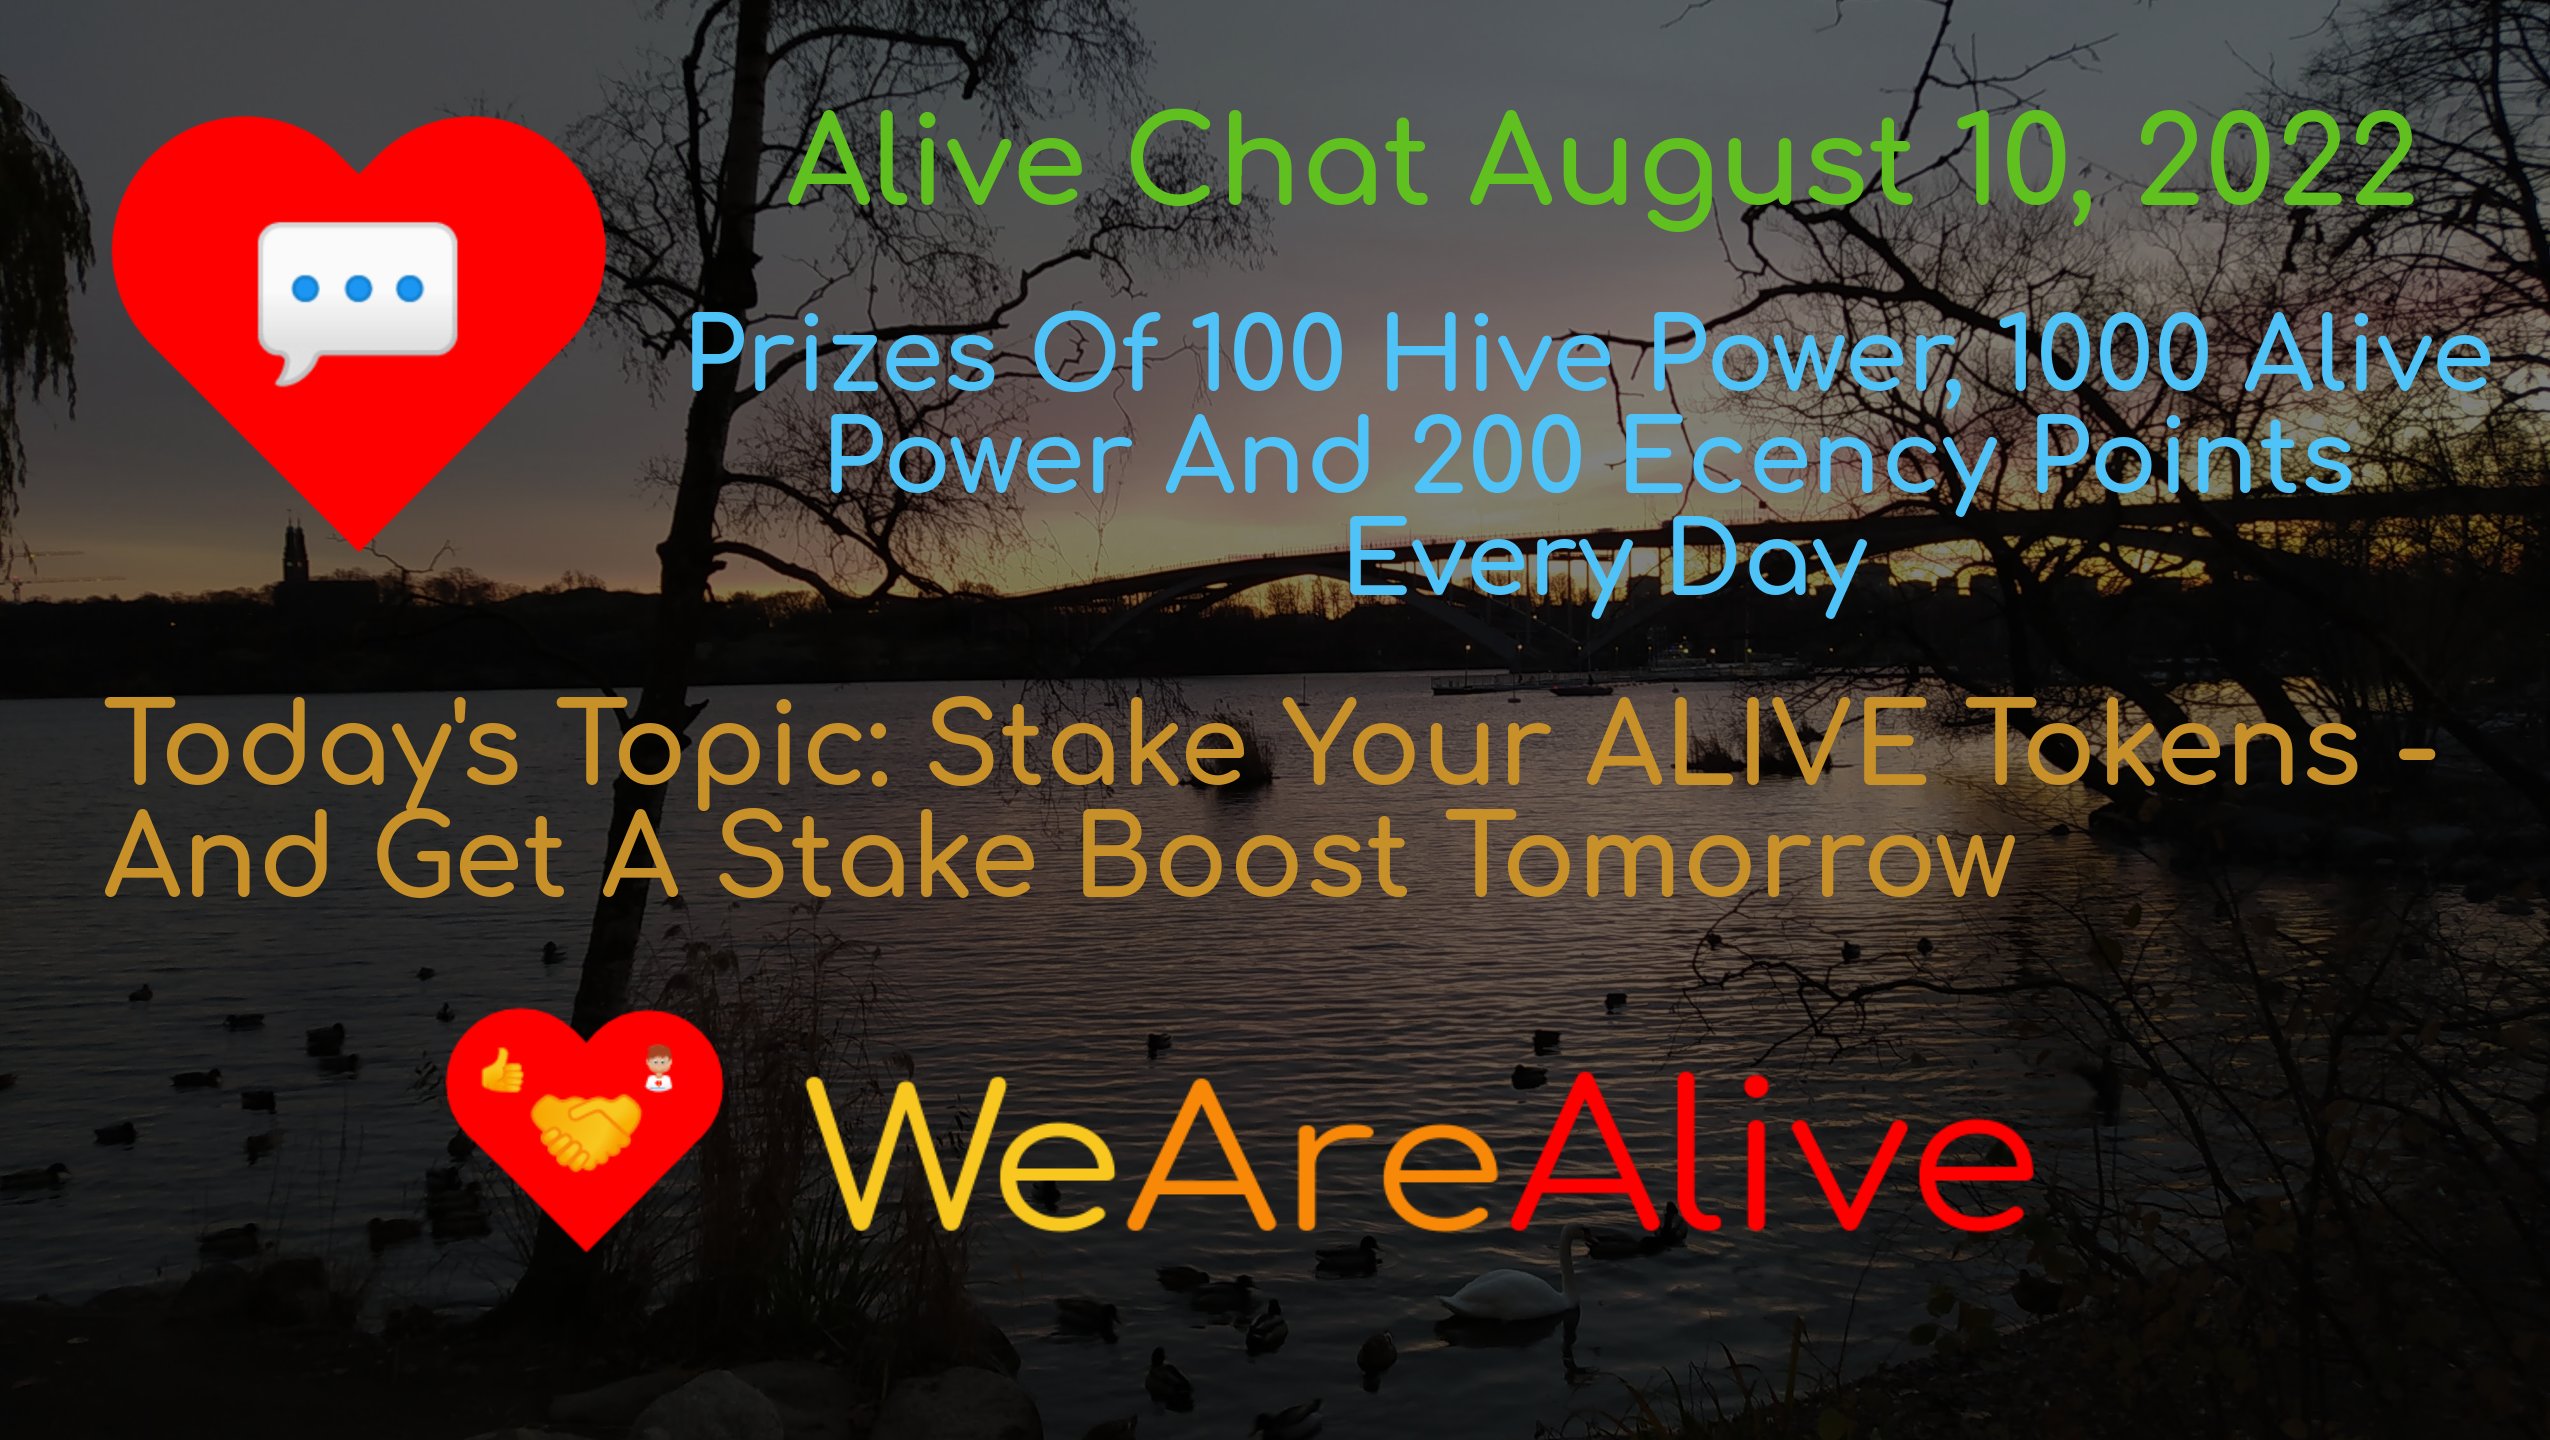 @alive.chat/alive-chat-august-10-2022-daily-prize-drawing-open-for-entries-todays-topic-stake-your-alive-tokens-and-get-a-stake-boost-tomo